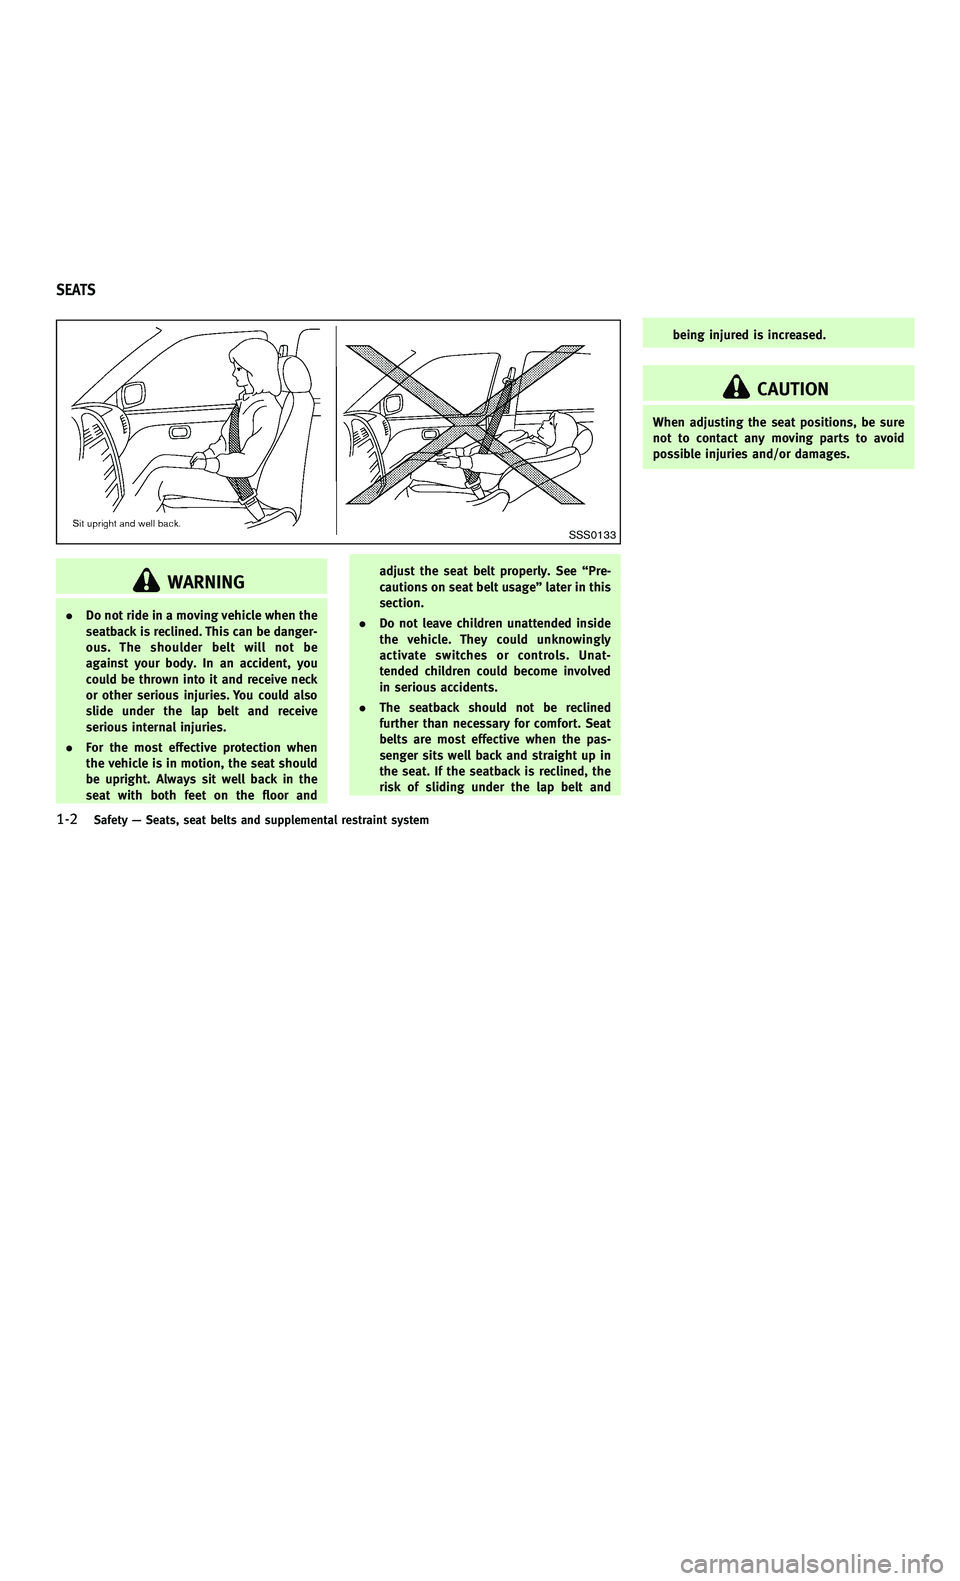 INFINITI M-HEV 2012  Owners Manual 858763.psp Nissan Infiniti OM OM2E HY51U0 Hybrid 1" gutter 12/21/2010 14\
:36:44 17 B
1-2Safety—Seats, seat belts and supplemental restraint system
SSS0133
WARNING
. Do not ride in a moving vehicle 